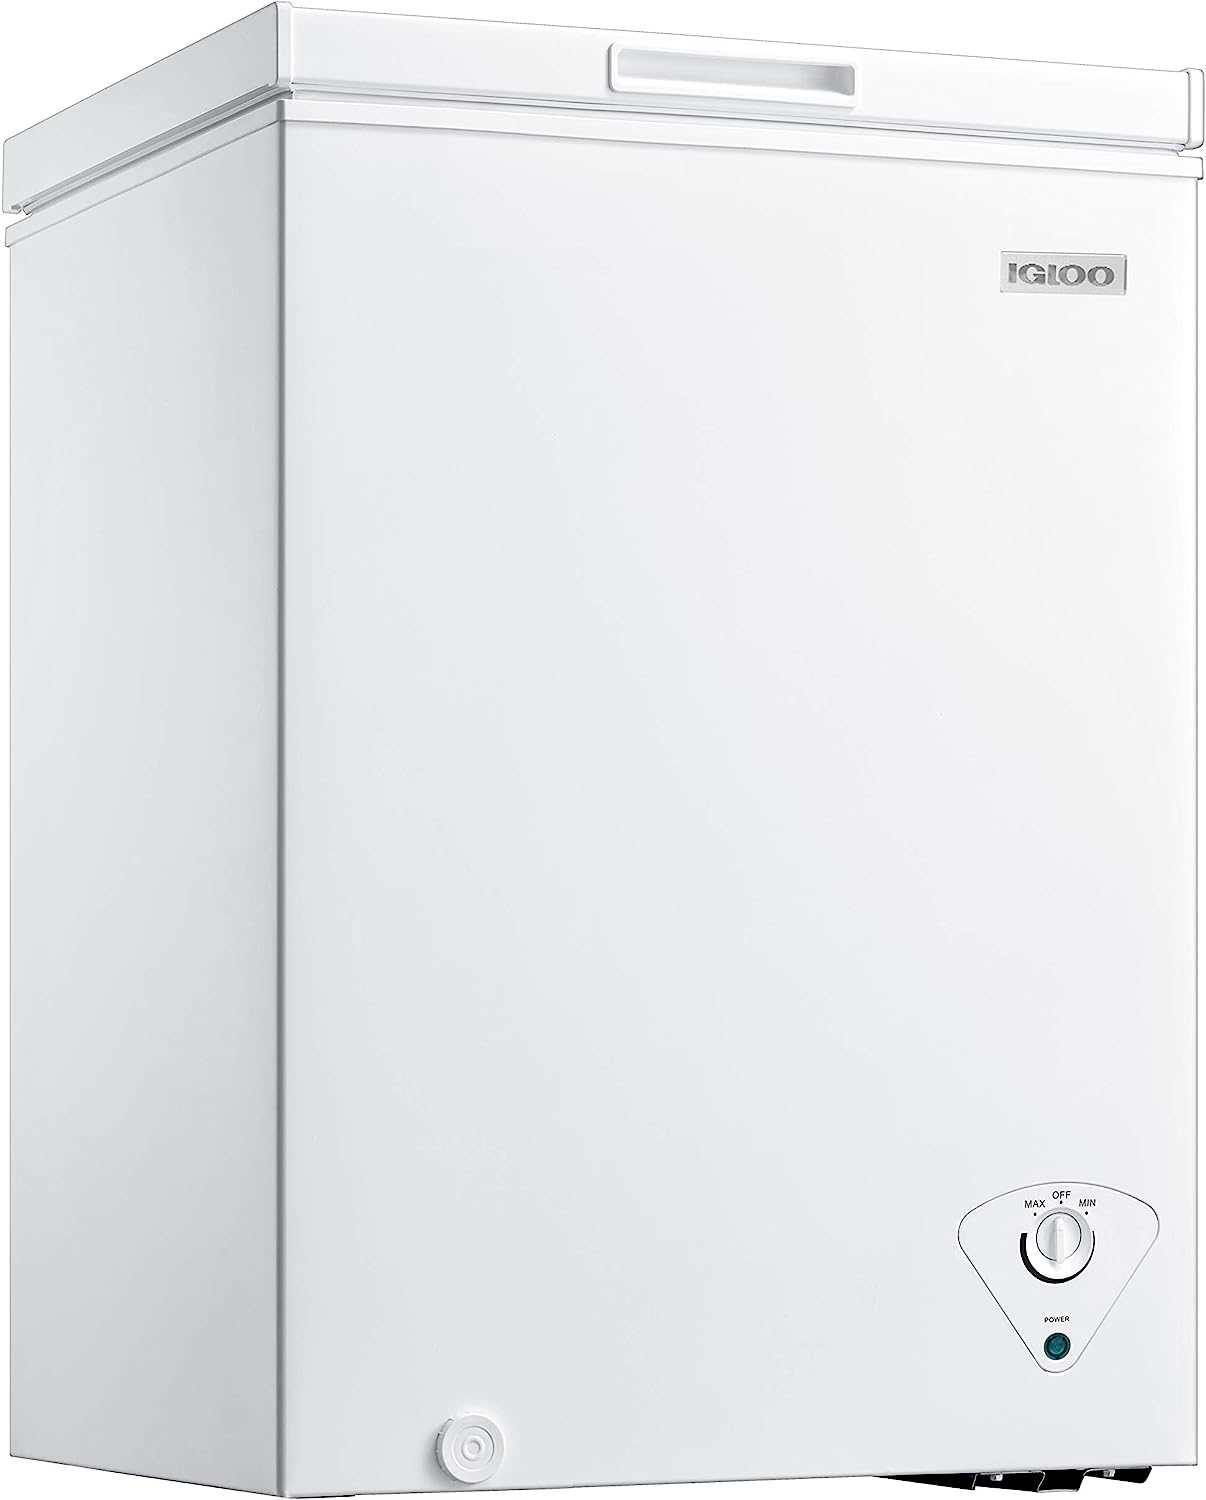 Igloo ICFMD35WH6A 3.5 Cu. Ft. Chest Freezer with [...]